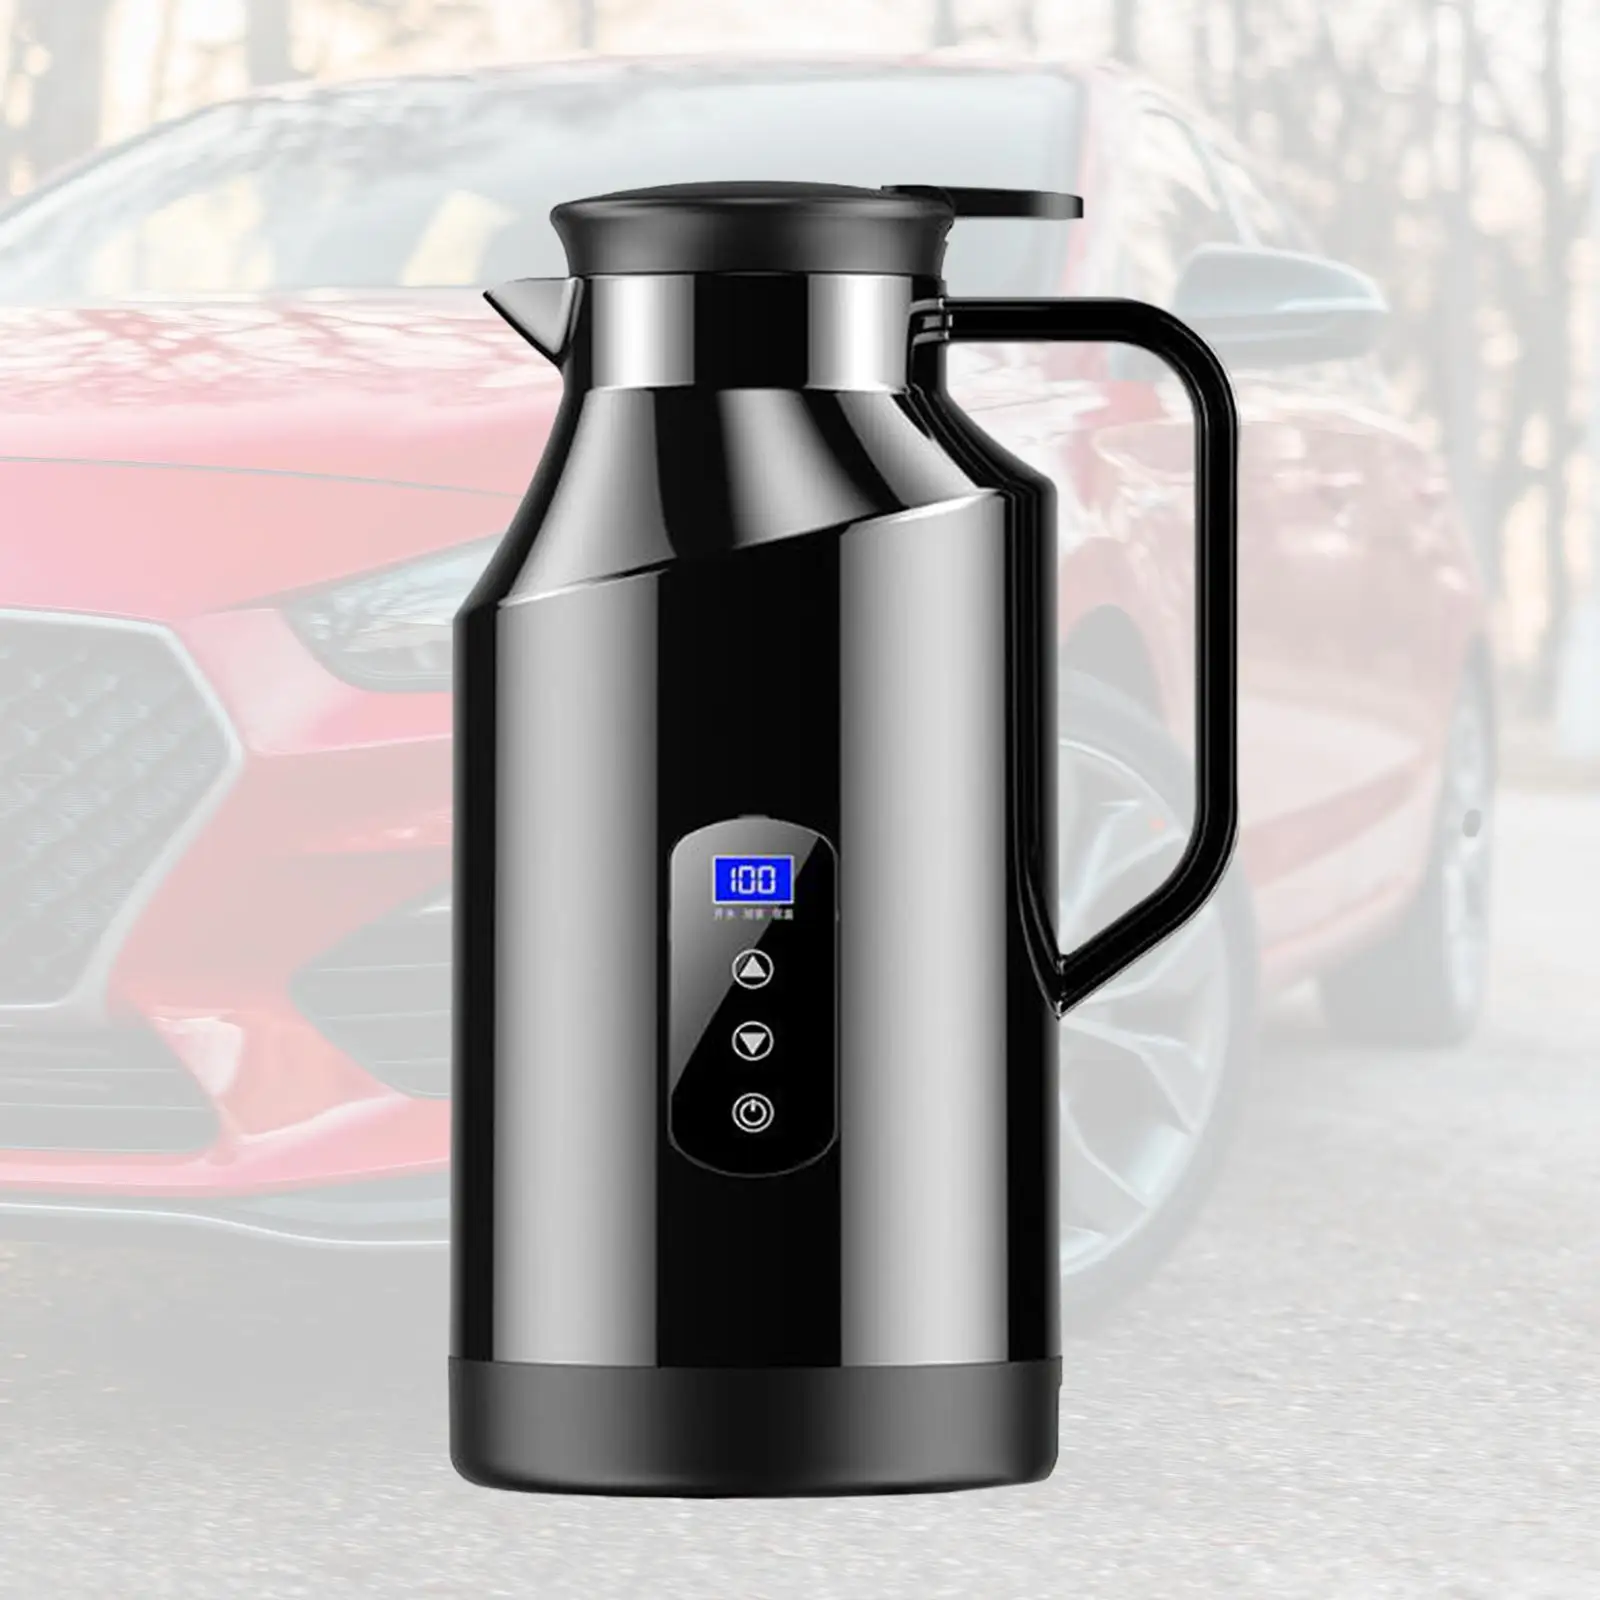 1.2L Stainless Steel Coffee Warmer Car Mug for Water Tea Coffee Milk Car Kettle Boiler for Self Driving Tour Camping